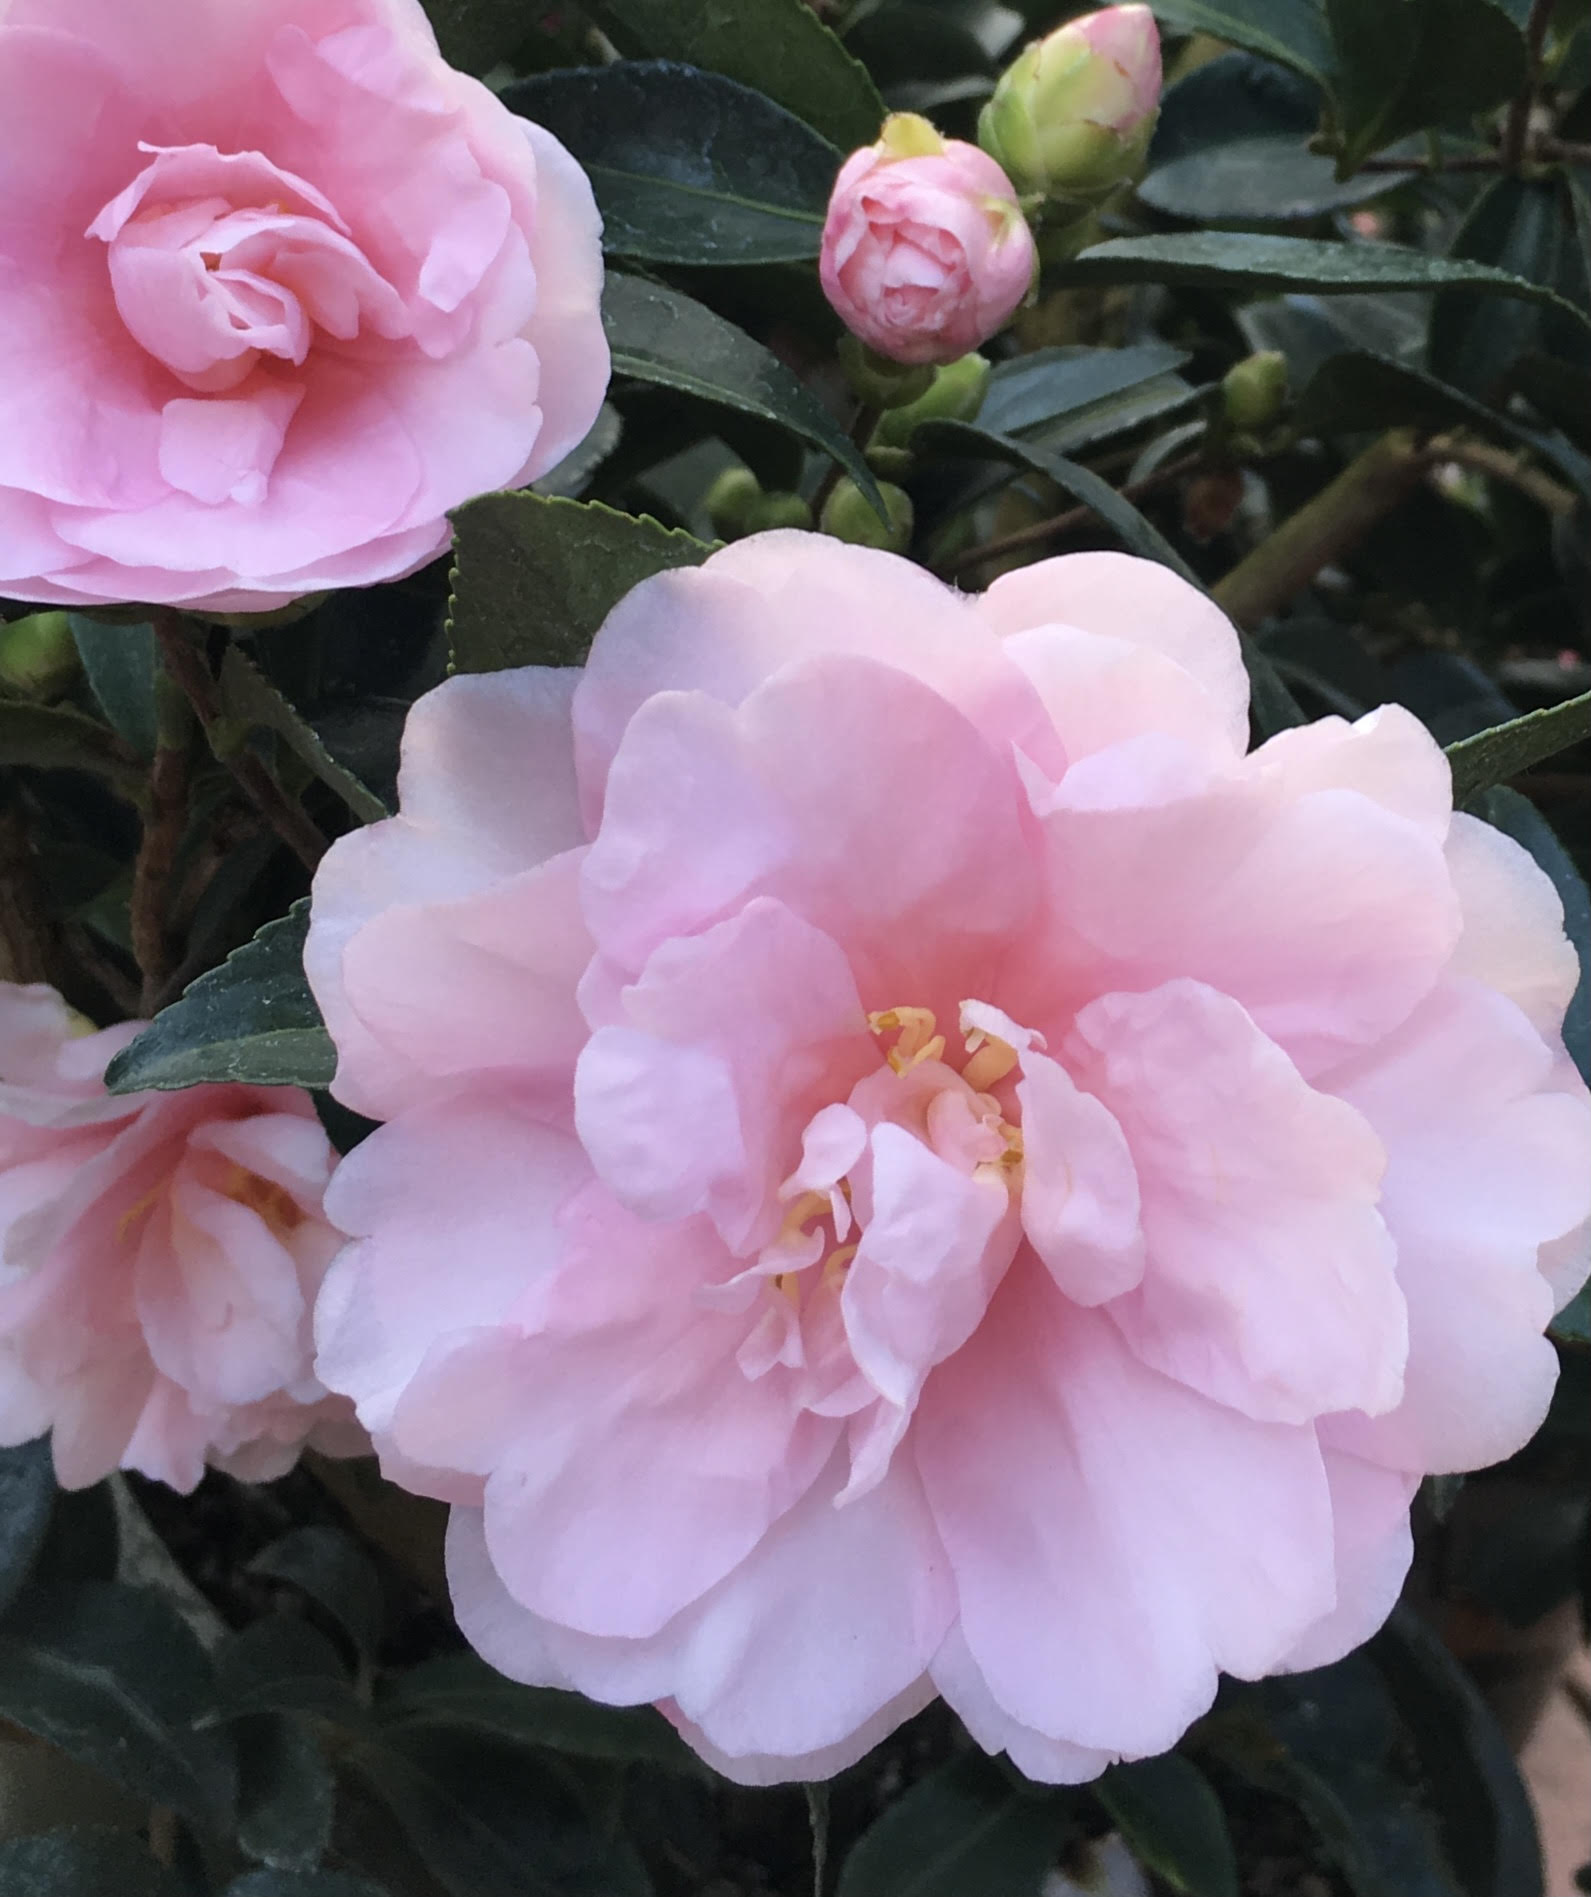 This camellia has feathery pink petals.